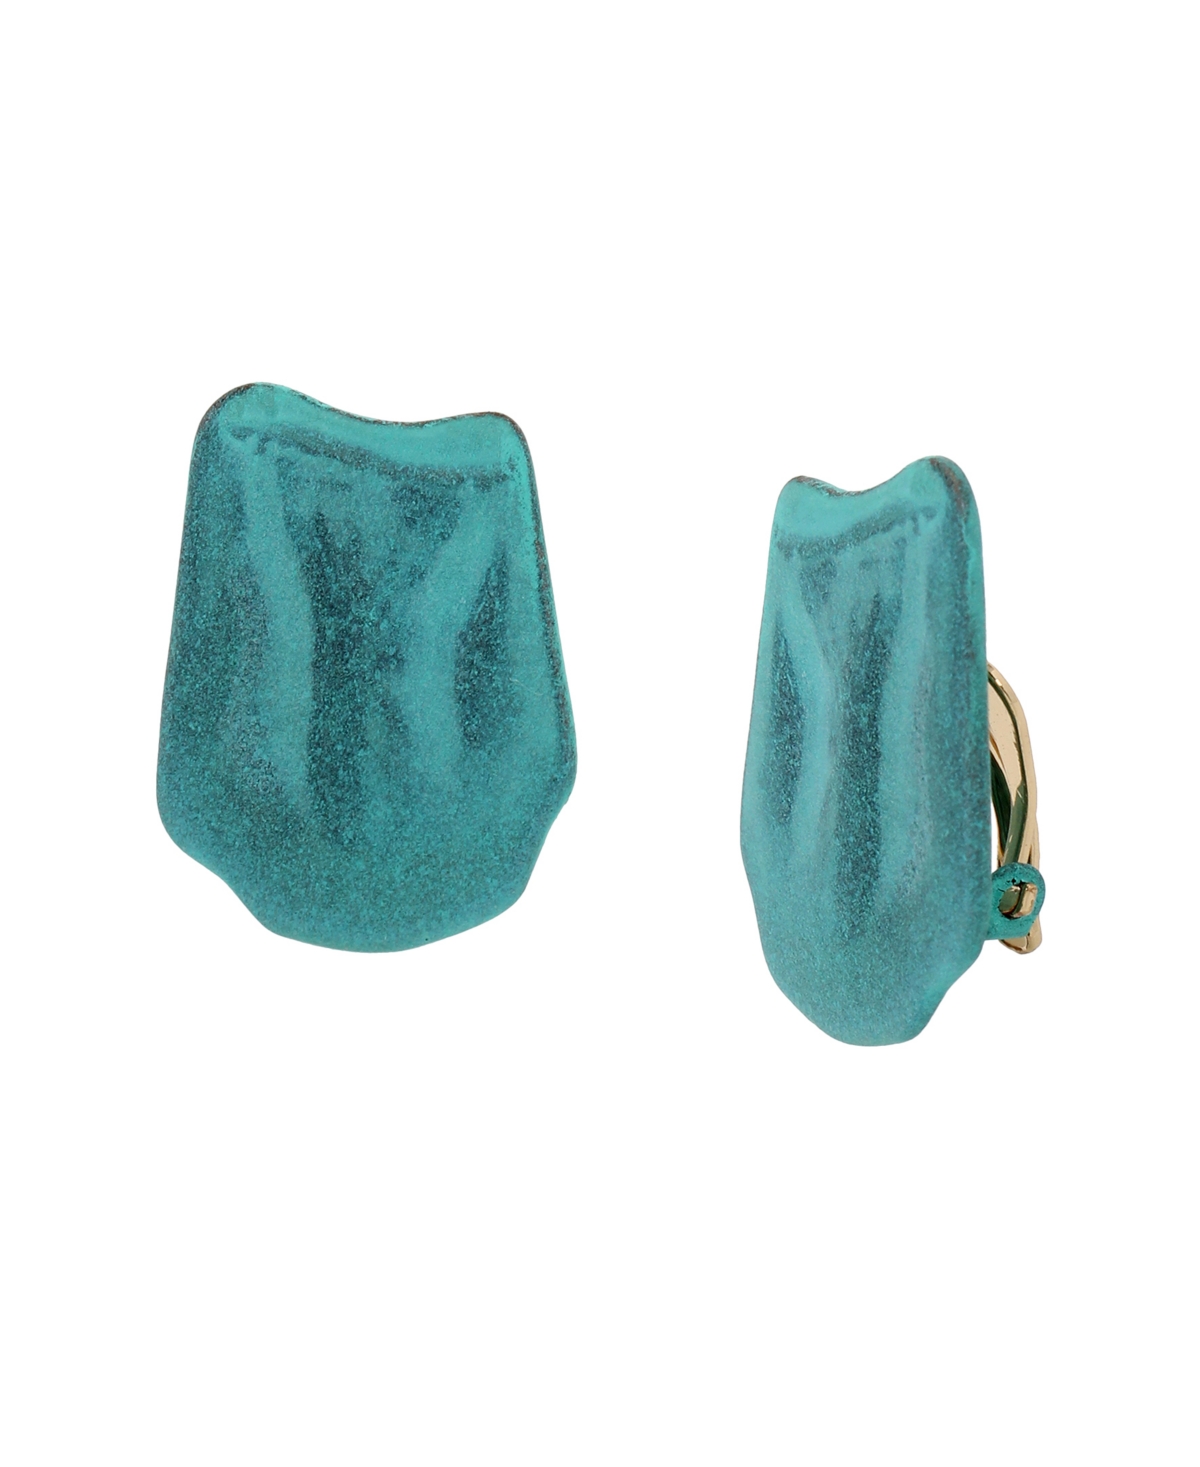 Turquoise Patina Textured Petal Clip-on Earrings - Patina